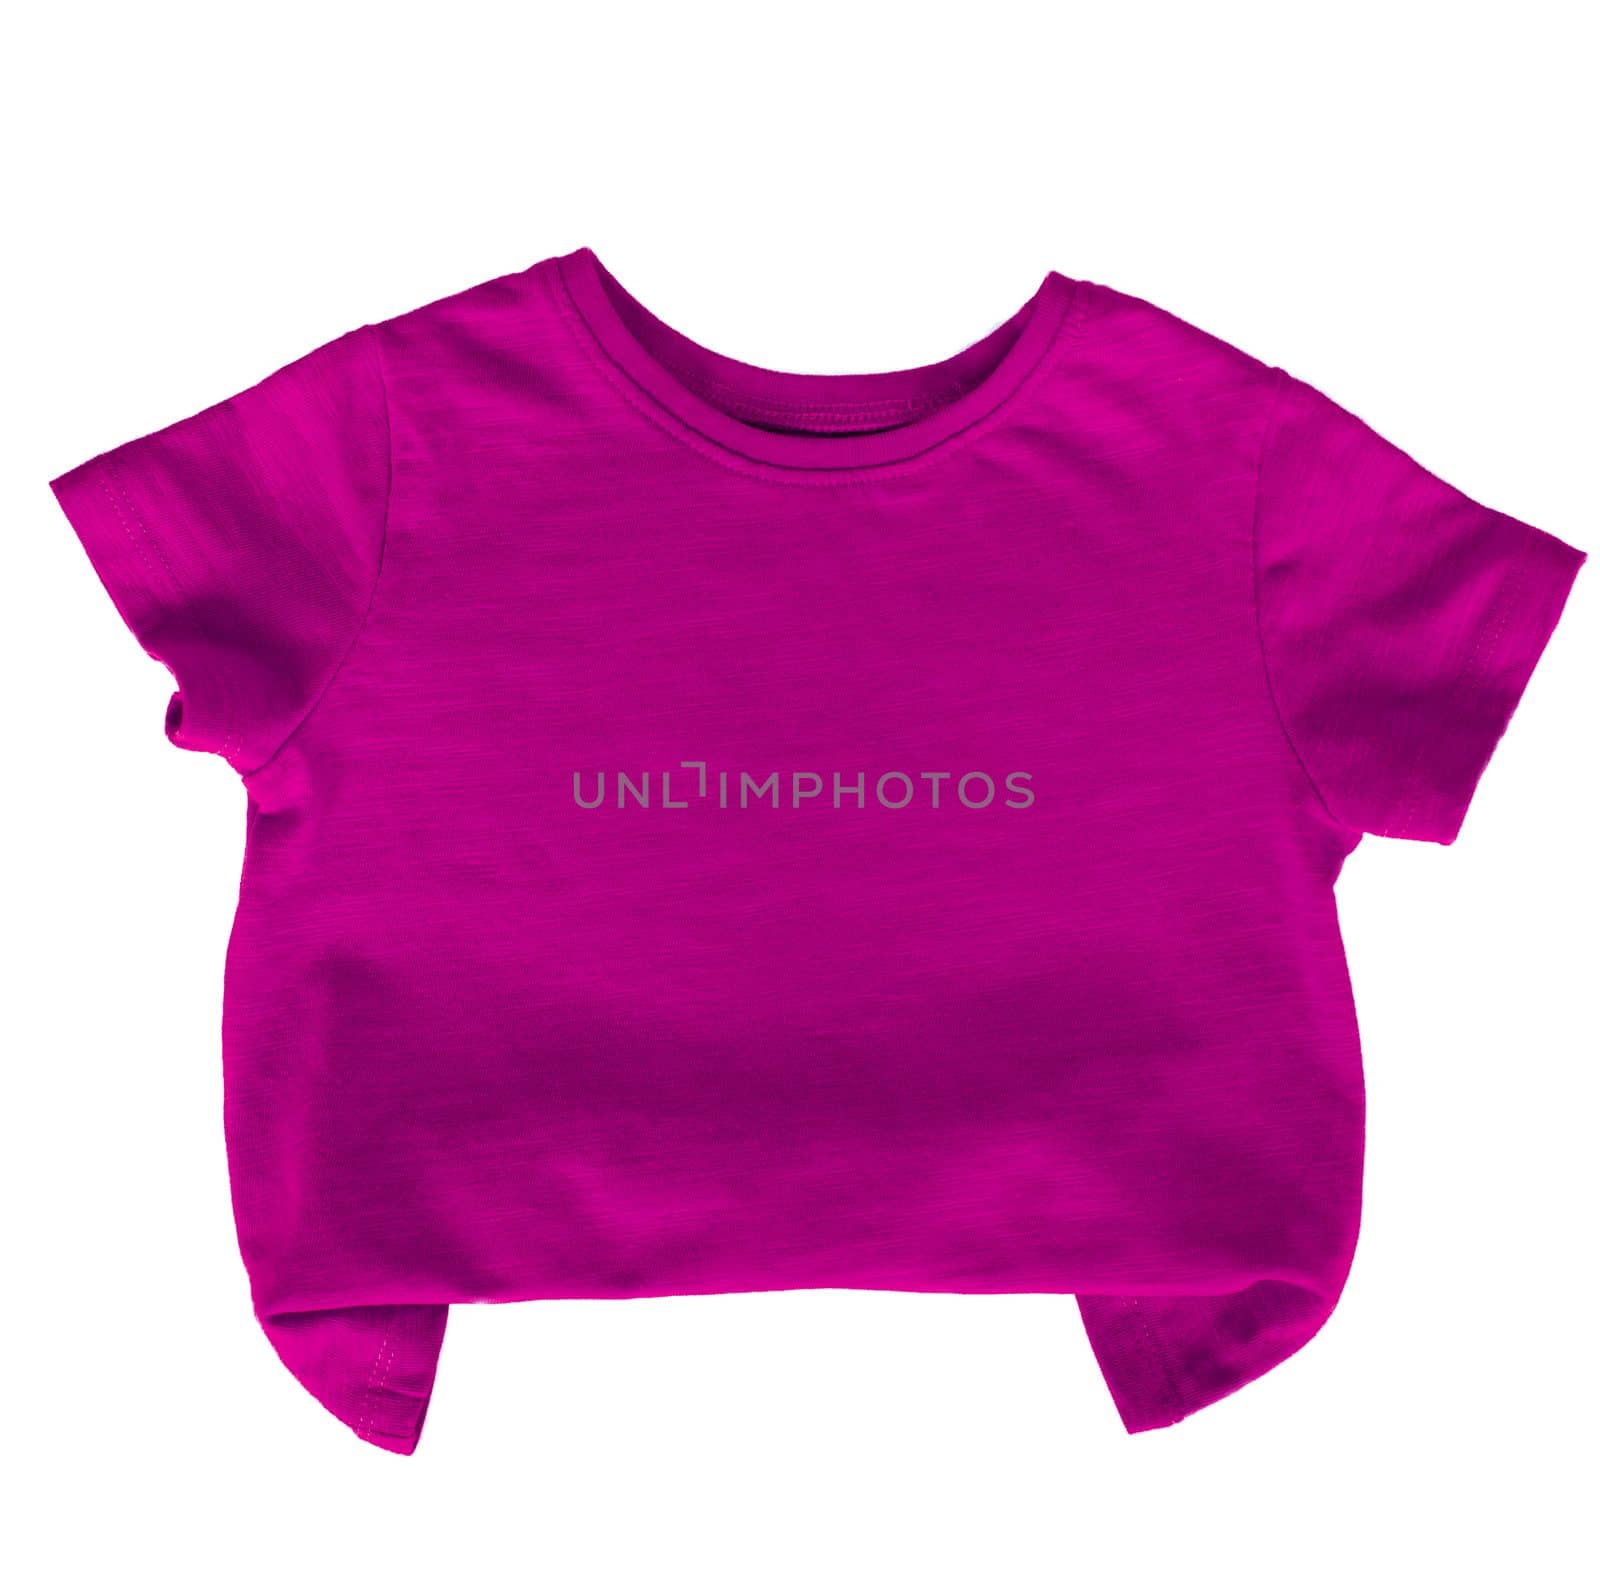 Kids t-shirt isolated on white background. Magenta color baby tshirt on white. Vivid Color trendy clothes. by Ri6ka